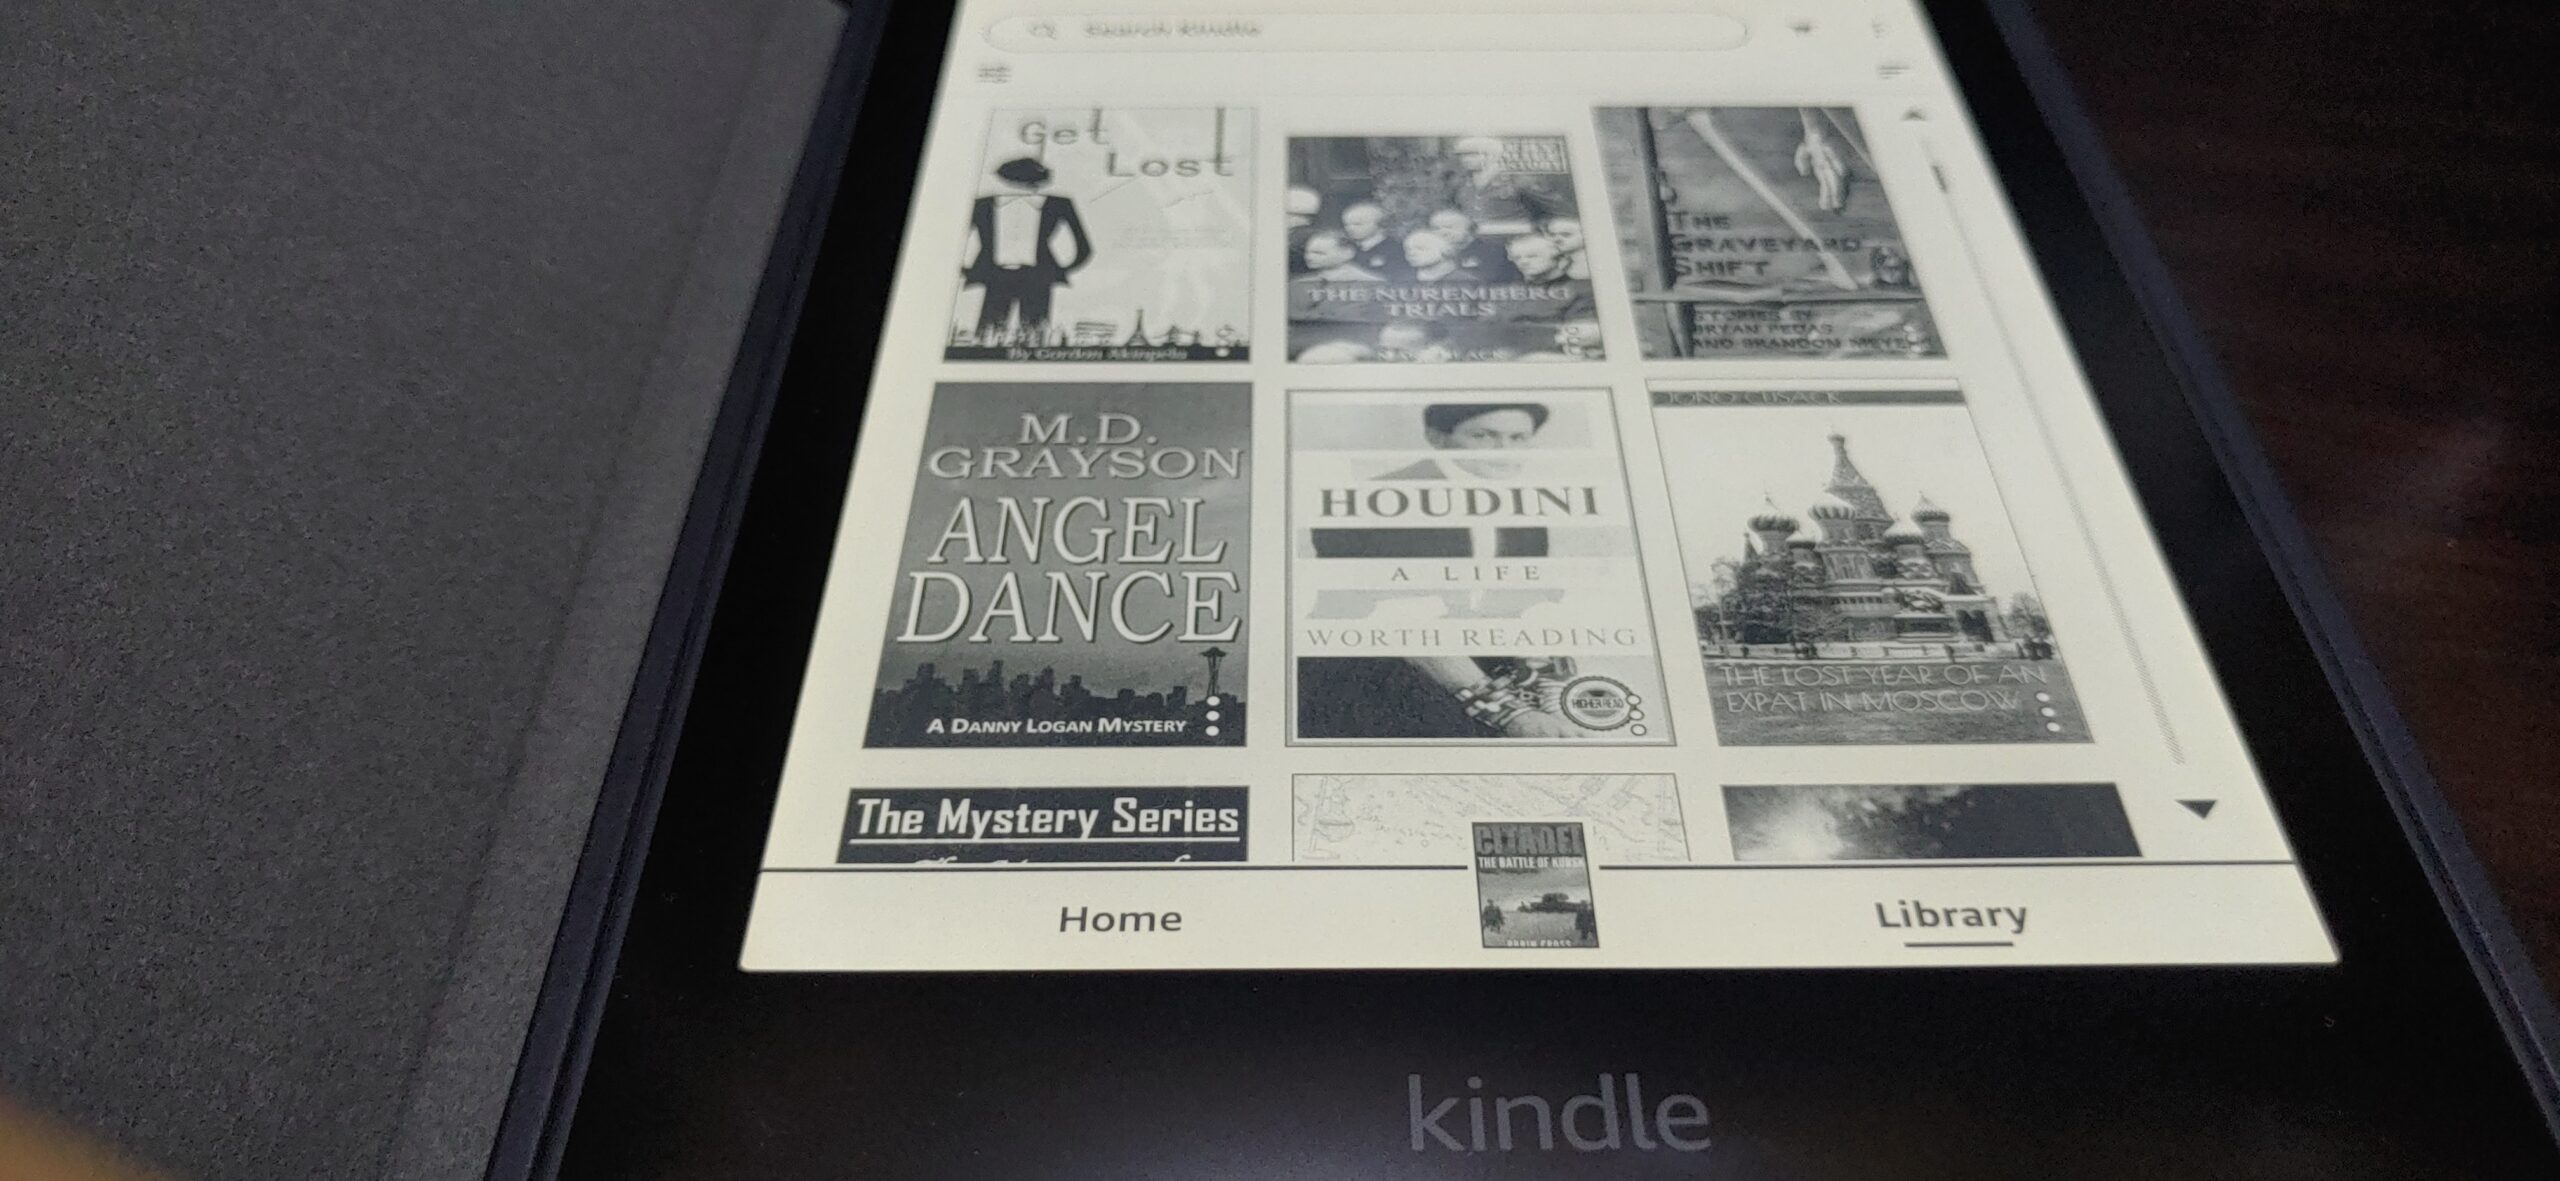 managing library books on kindle